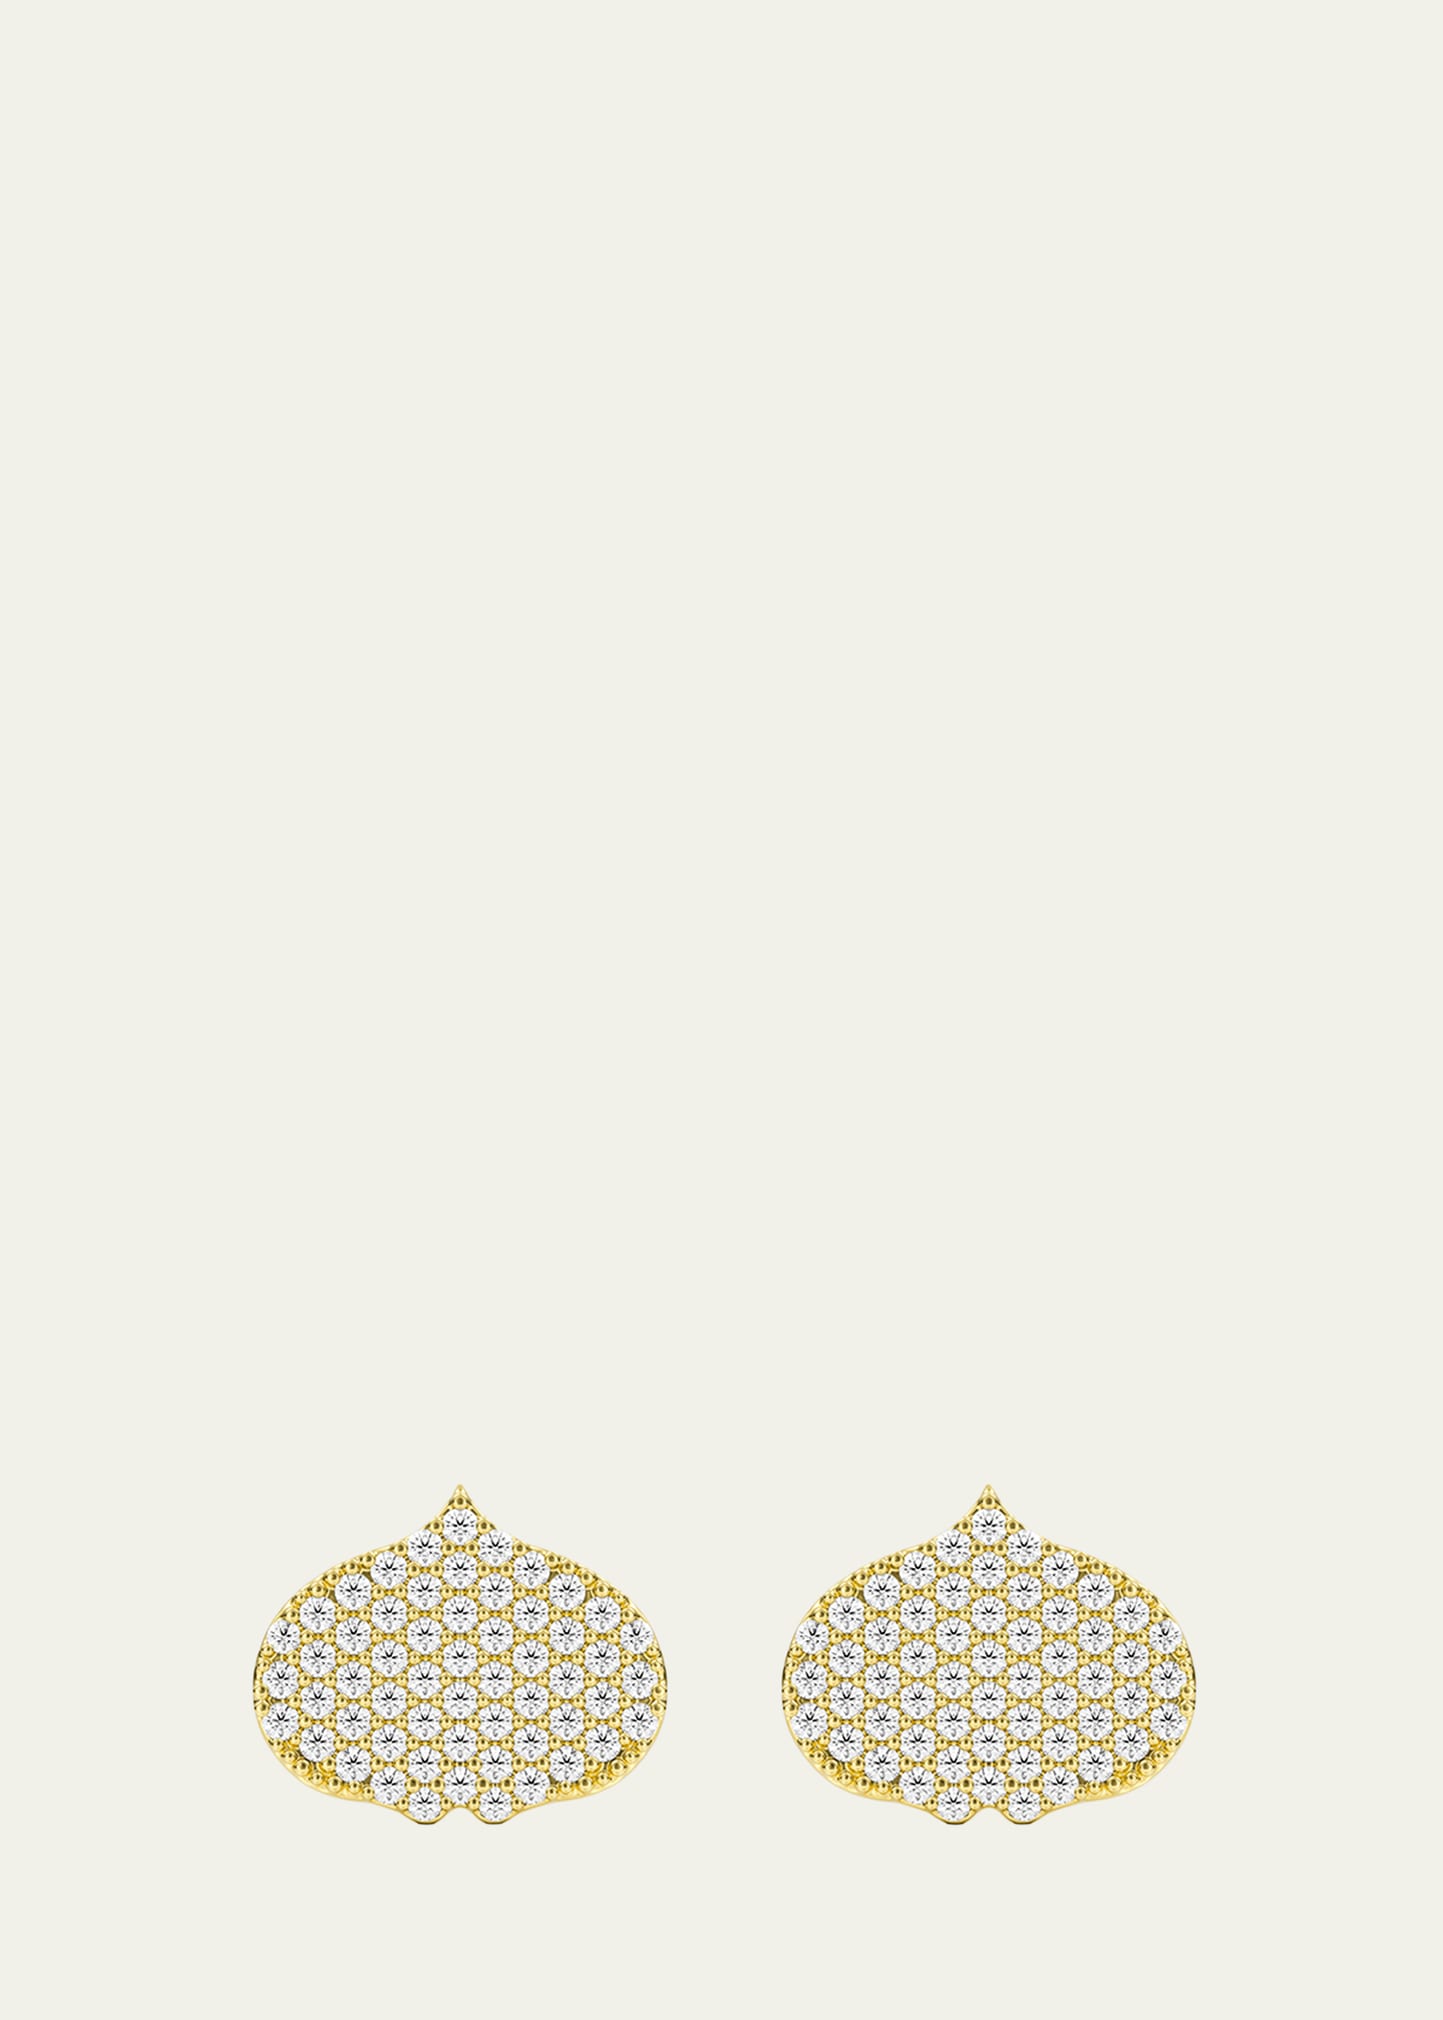 Eye Adore Stud Earrings in Yellow Gold and White Diamonds, 12mm